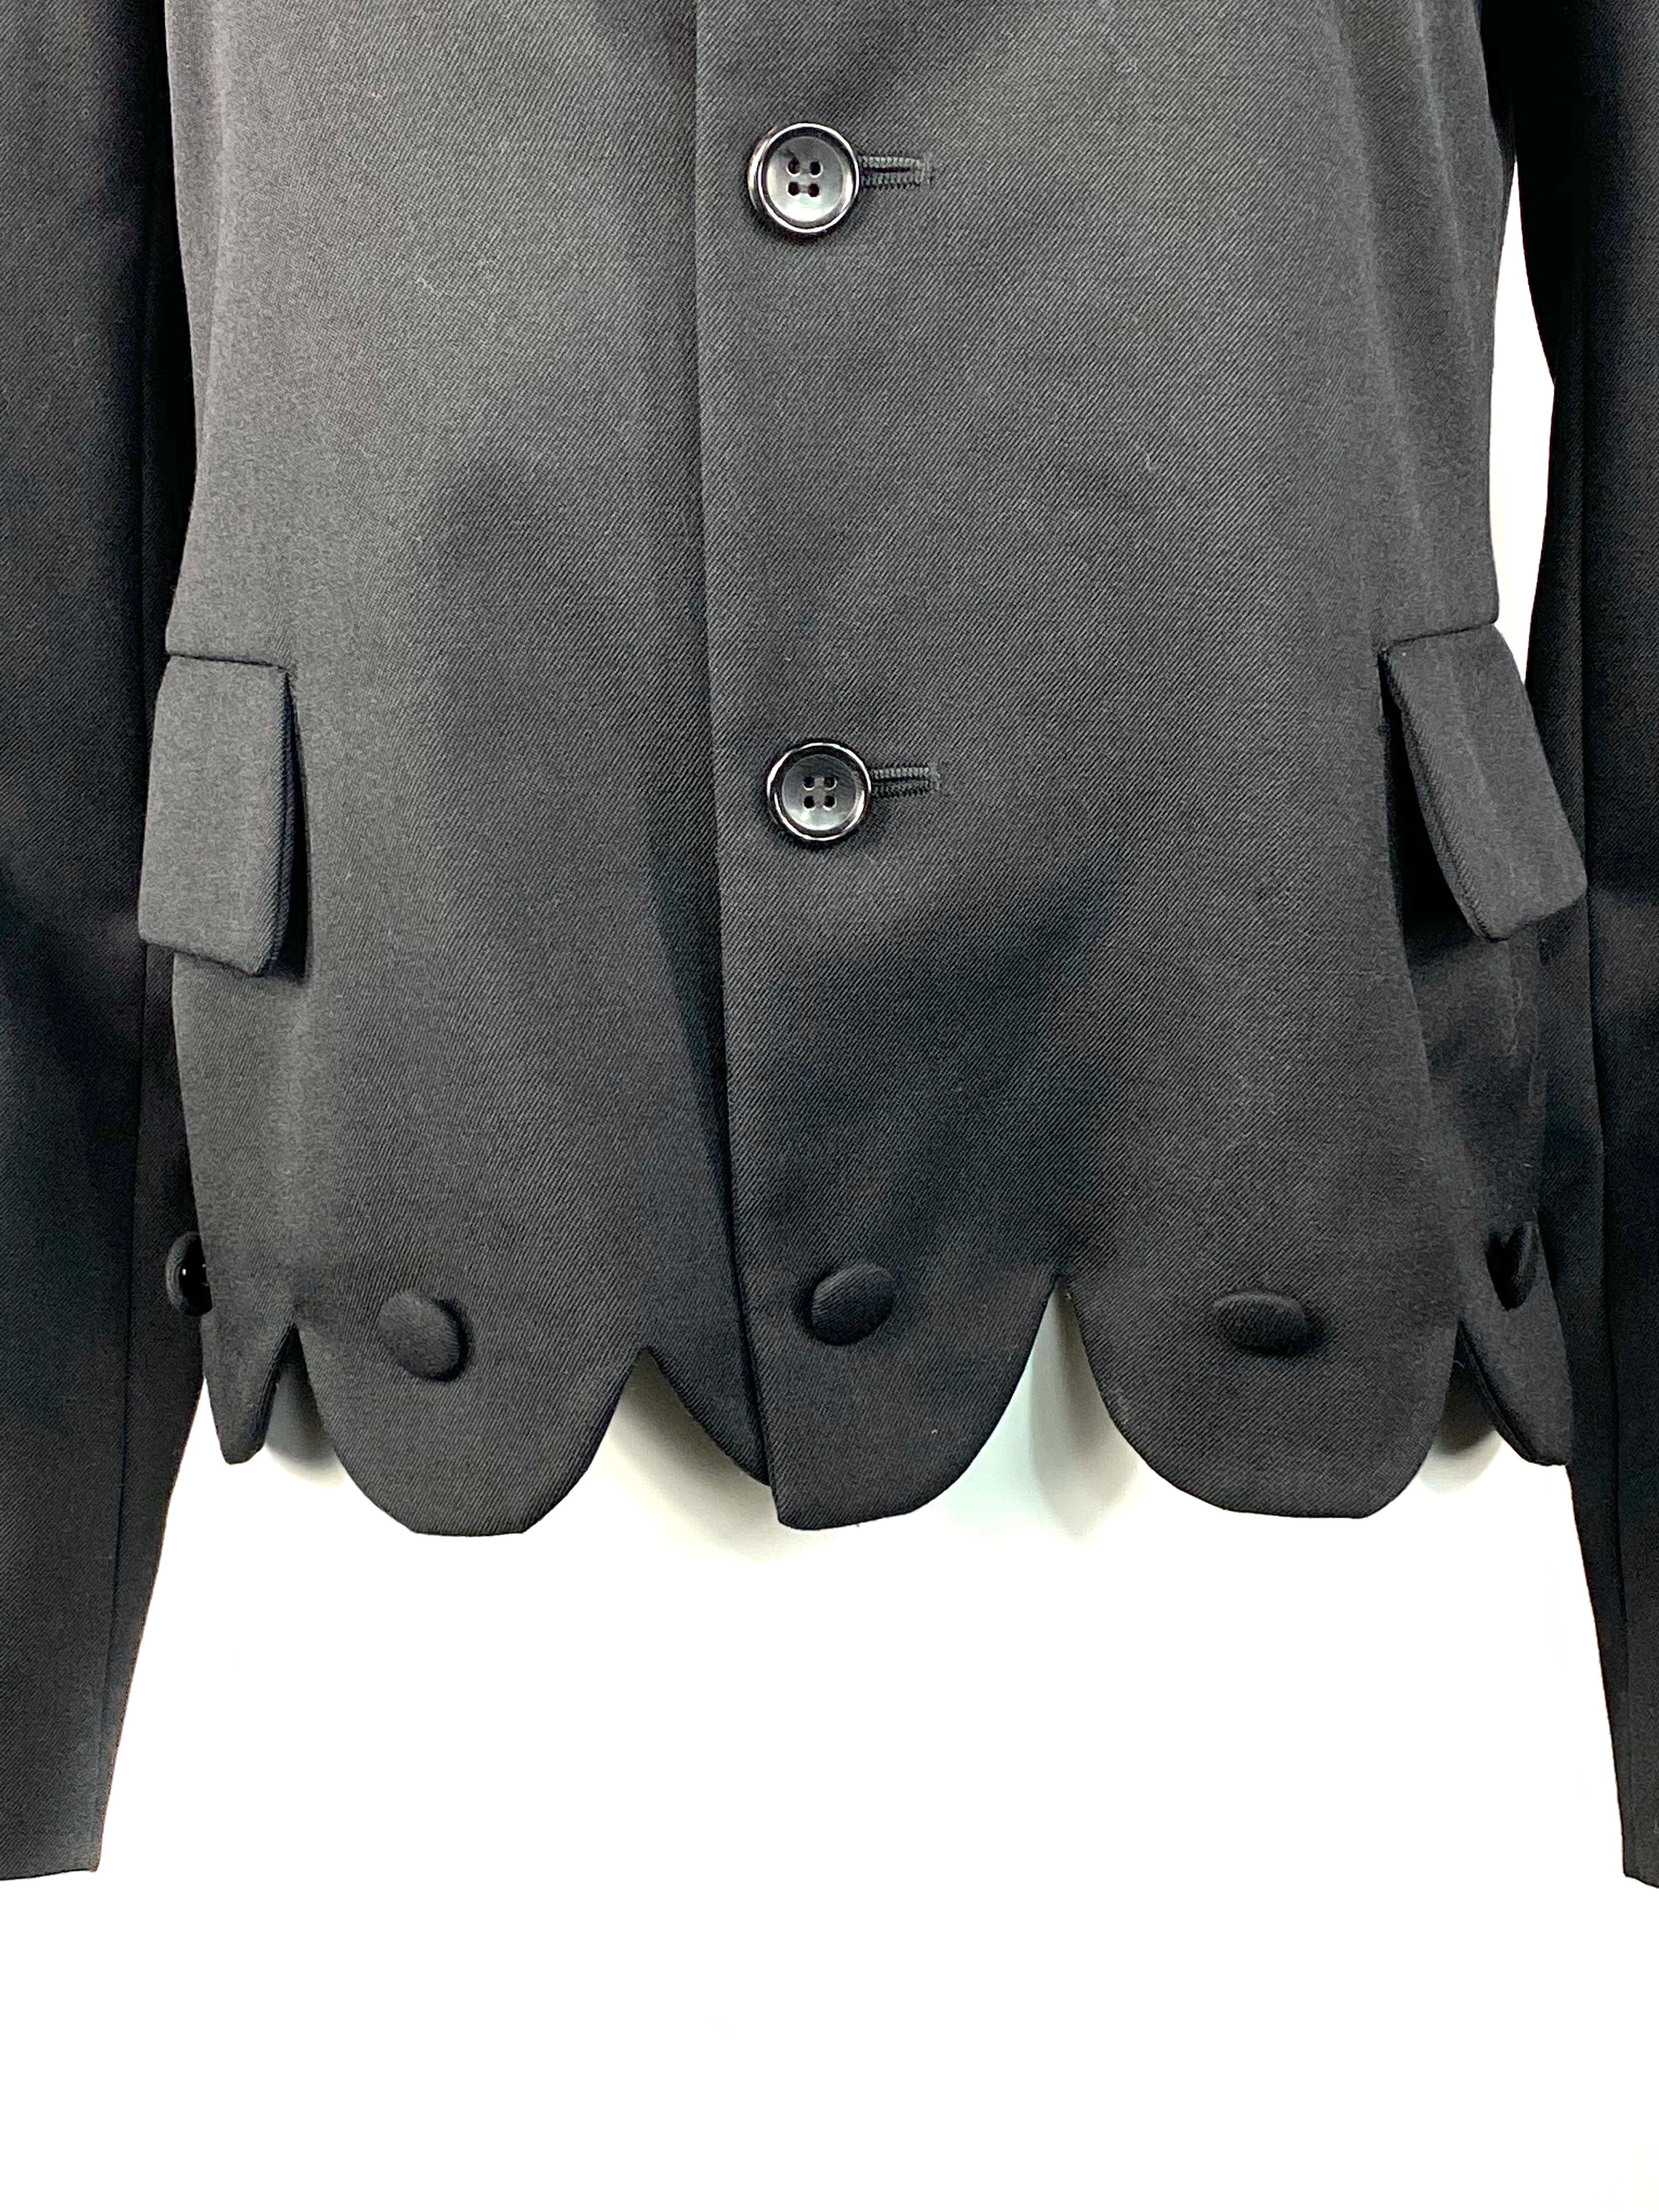 Comme des Garcons GIRL Black Wool Blazer Jacker w/ Buttons Size S

Product details:
Size Small
Featuring rounded trim w/ button detail on the bottom
Front three buttons closure
Two pockets on the front
Three buttons on the bottom of each sleeve
Made